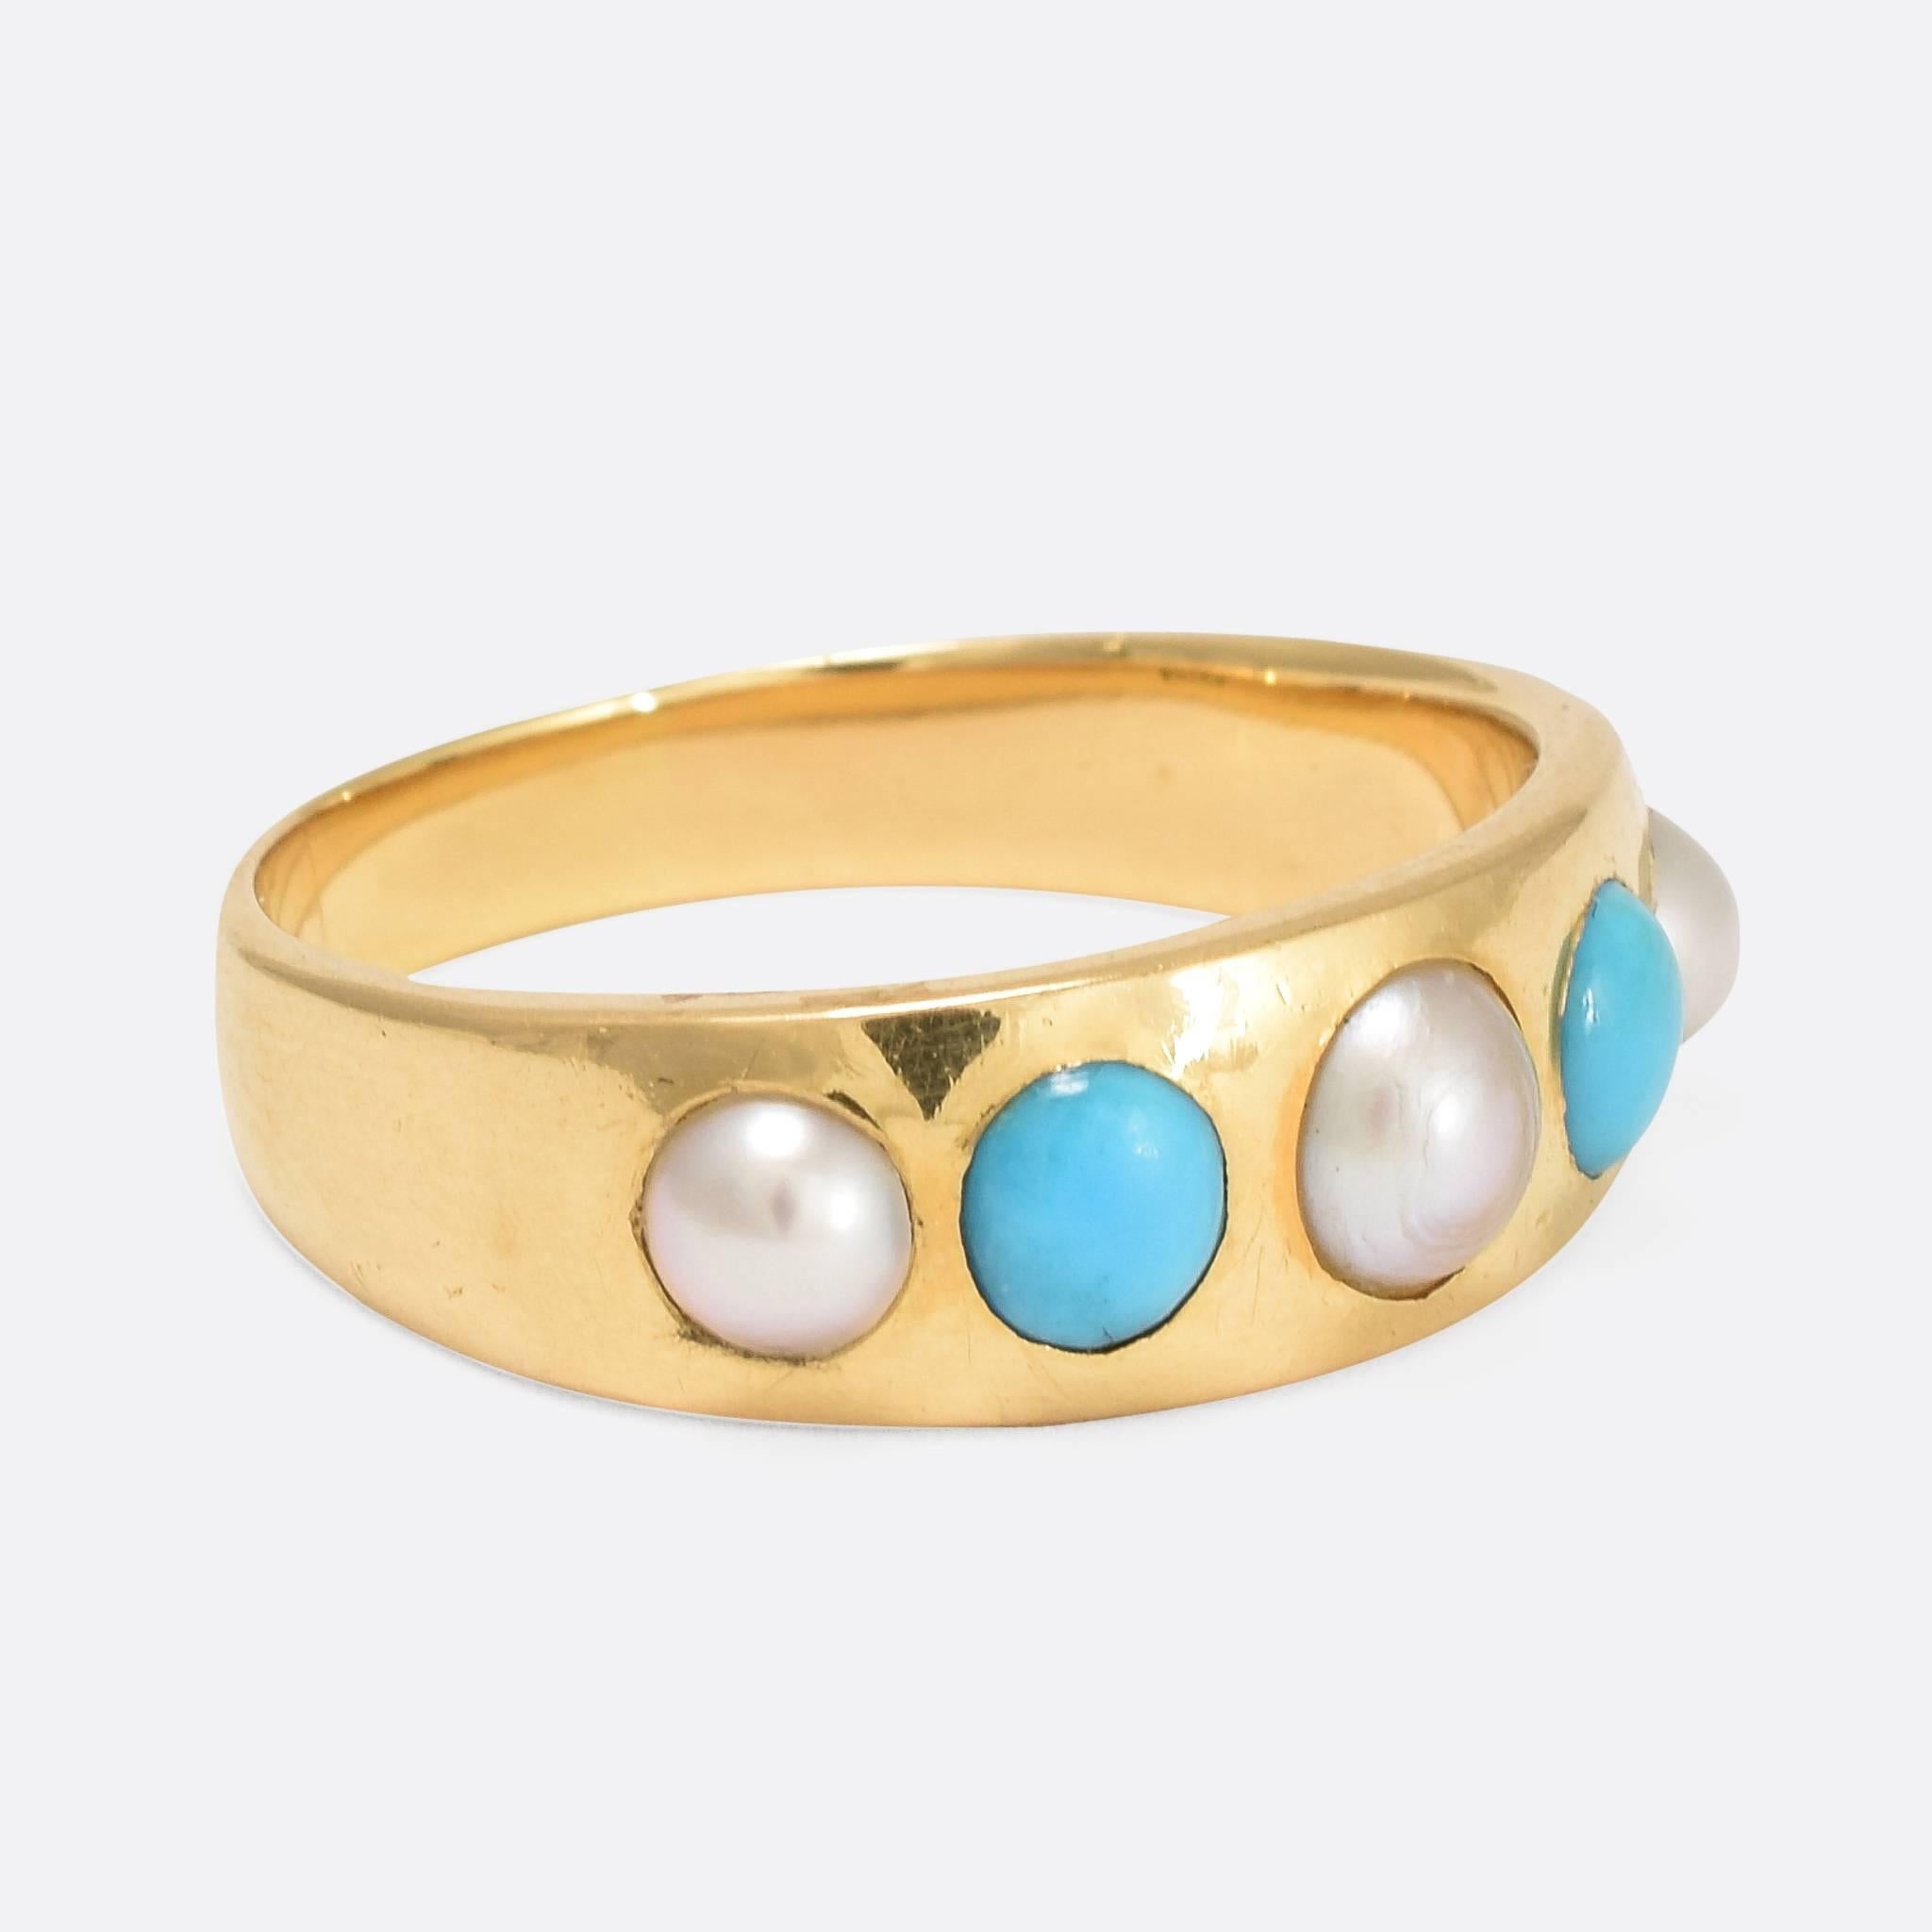 This attractive antique gypsy ring is set with five stones: three natural pearls and two turquoise cabochons. Modelled in 18ct gold, it dates to c.1880. They gypsy ring was a popular style throughout the Victorian era, characterised by a tapered